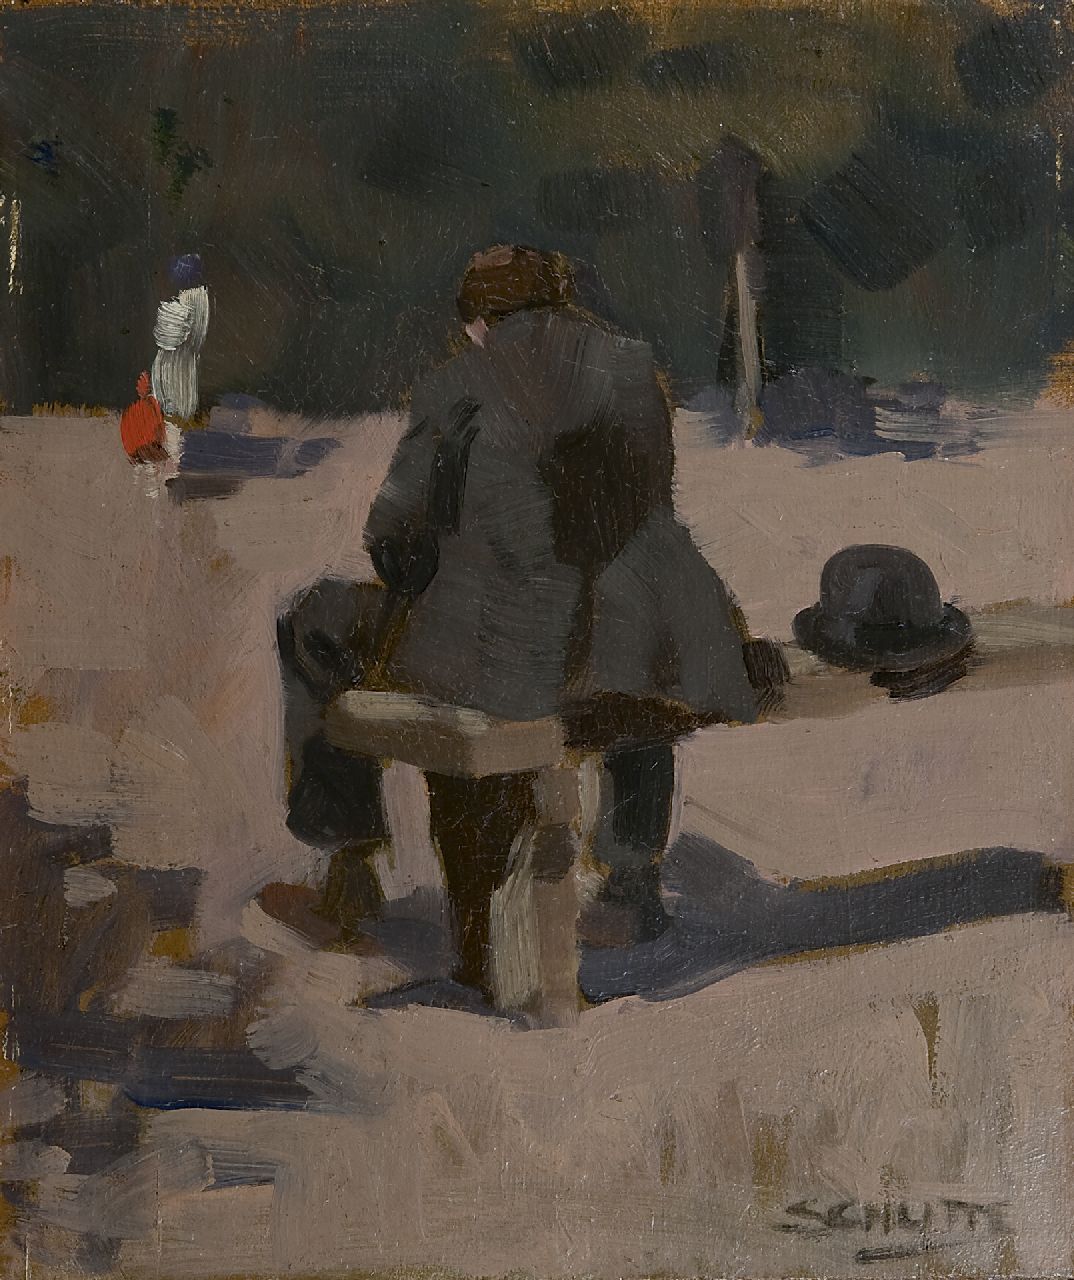 Schutte L.H.H.  | 'Louis' Hermanus Hendrikus Schutte, In the park, oil on painter's board 27.0 x 22.7 cm, signed l.r. and painted ca. 1913